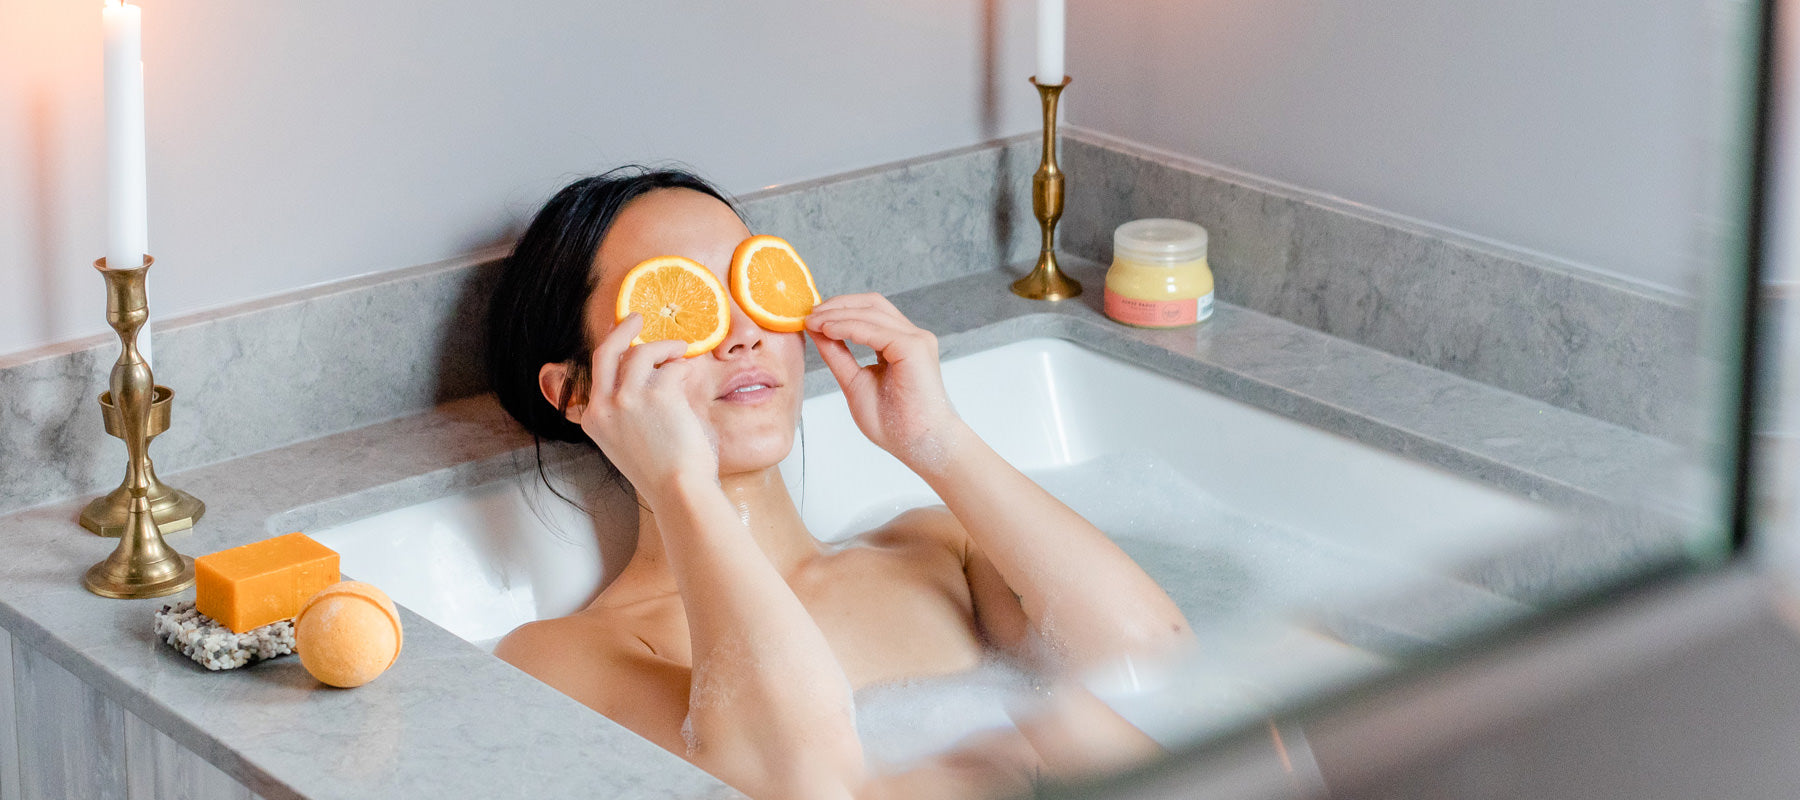 Woman in bath with orange slices on her eyes. On the side of the tub are Canadian local Rocky Mountain Soap Company natural bar soap, bath bomb and body scrub.  